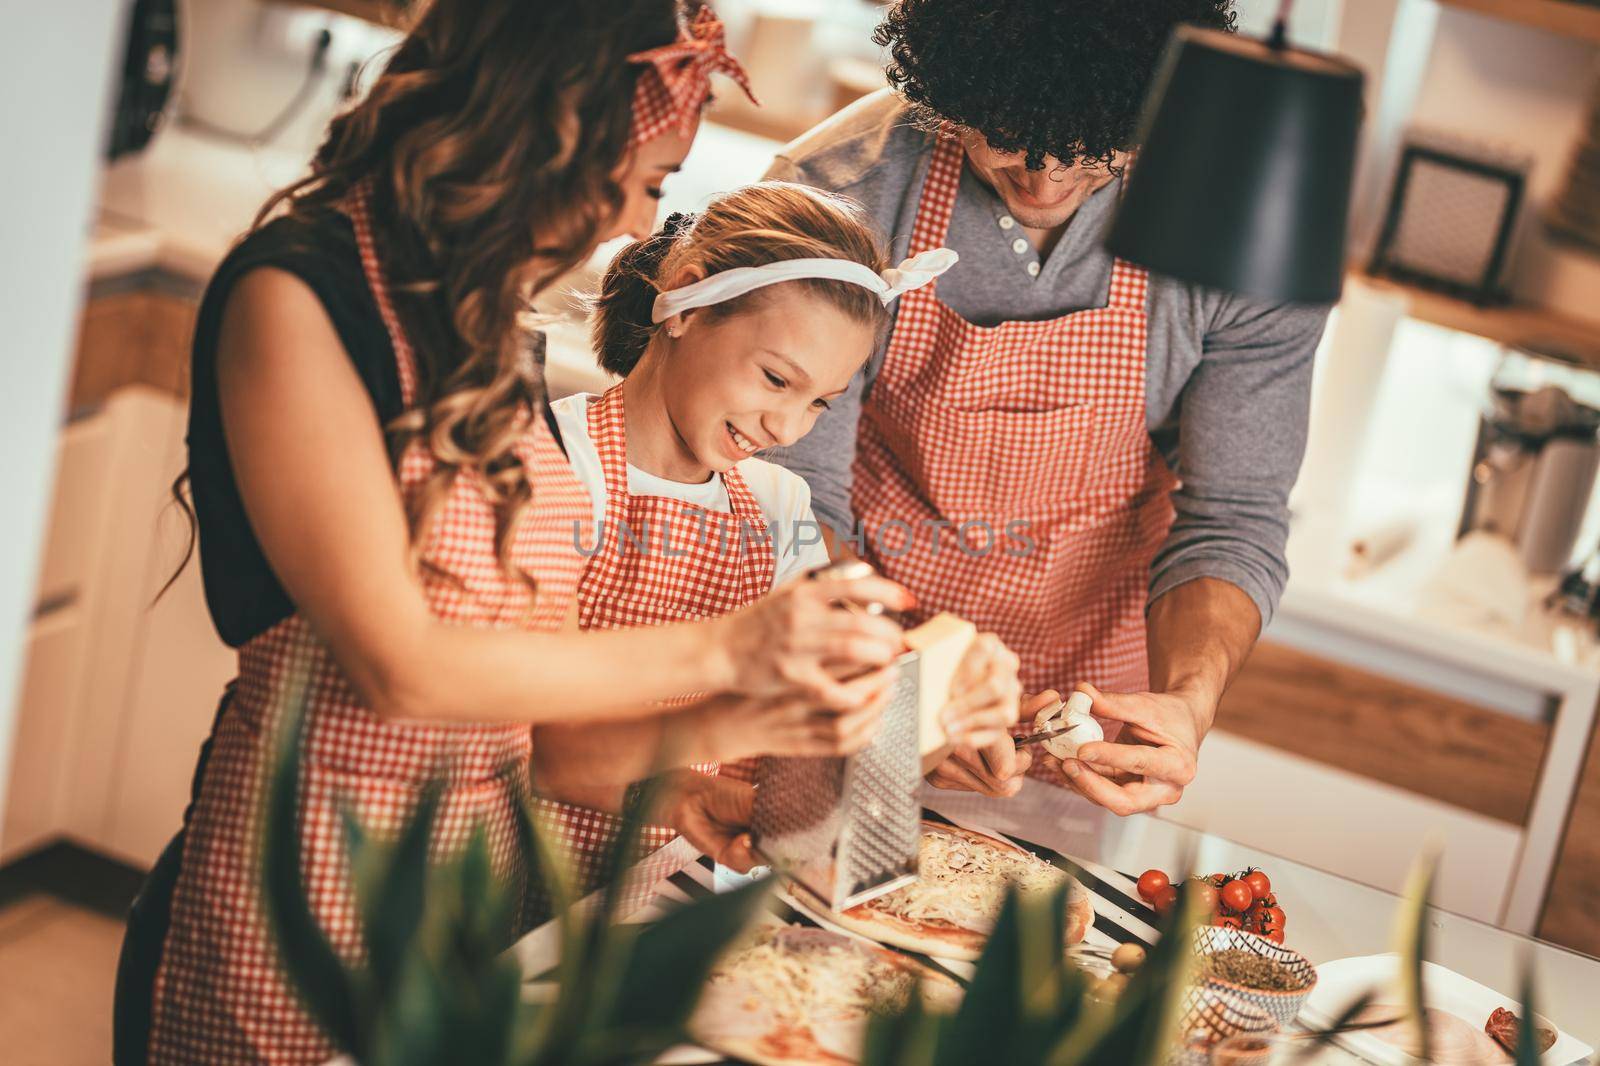 Happy parents and their daughter are preparing meal together in the kitchen. Little girl and her mother are putting cheese on the pizza and her father is cutting mushrooms.